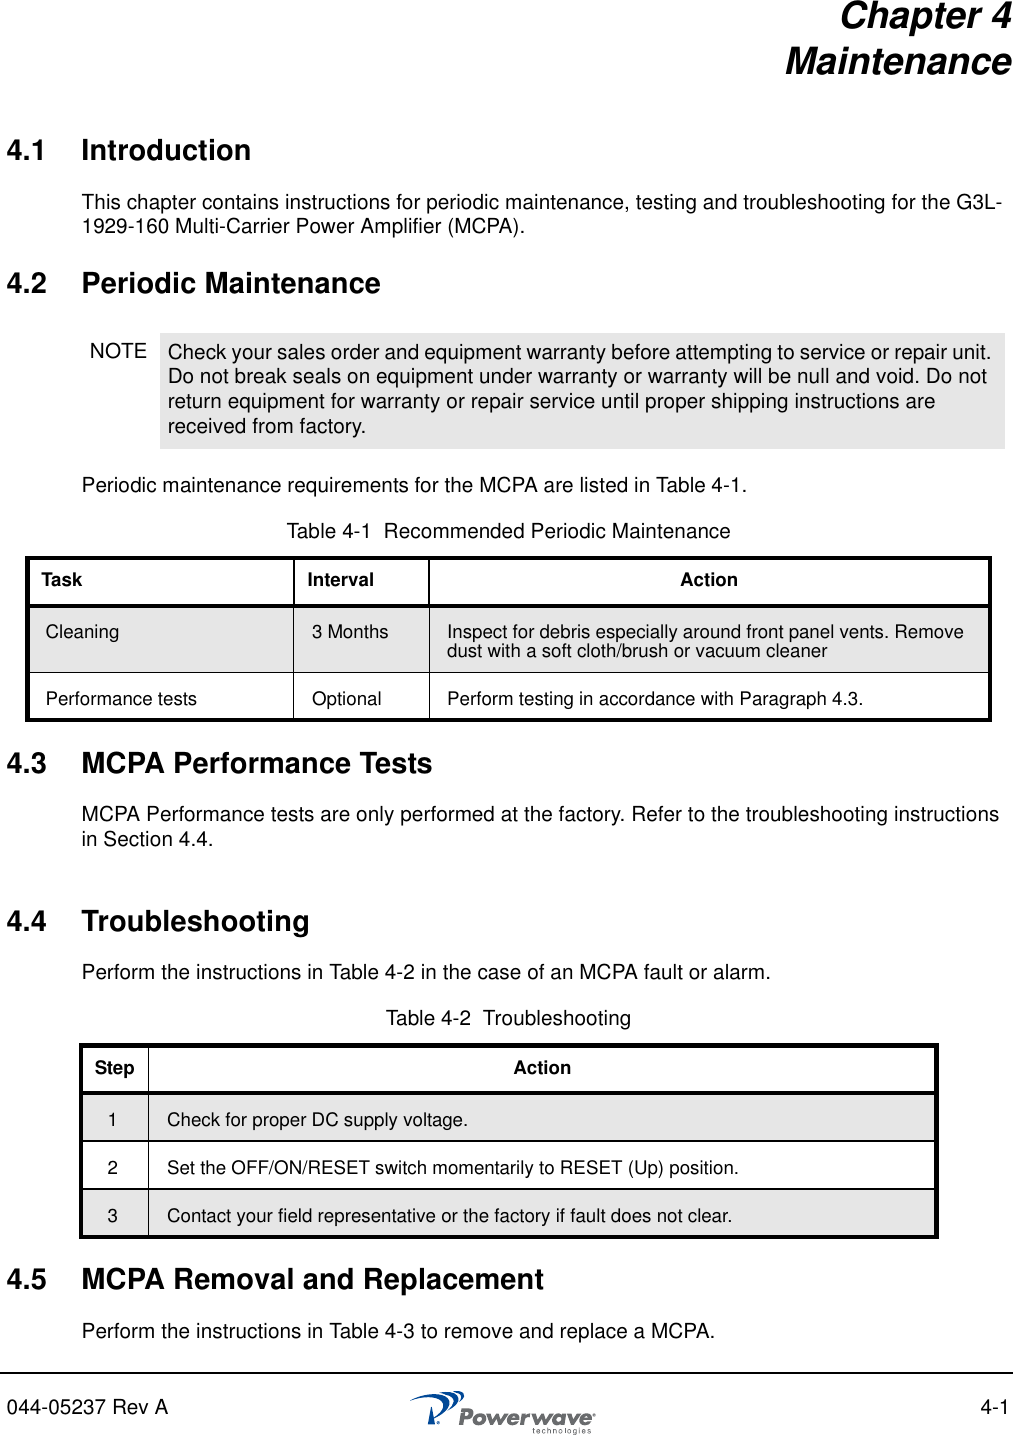 044-05237 Rev A 4-1Chapter 4Maintenance4.1 IntroductionThis chapter contains instructions for periodic maintenance, testing and troubleshooting for the G3L-1929-160 Multi-Carrier Power Amplifier (MCPA).4.2 Periodic MaintenancePeriodic maintenance requirements for the MCPA are listed in Table 4-1.4.3 MCPA Performance TestsMCPA Performance tests are only performed at the factory. Refer to the troubleshooting instructions in Section 4.4.4.4 TroubleshootingPerform the instructions in Table 4-2 in the case of an MCPA fault or alarm.4.5 MCPA Removal and ReplacementPerform the instructions in Table 4-3 to remove and replace a MCPA.NOTE Check your sales order and equipment warranty before attempting to service or repair unit. Do not break seals on equipment under warranty or warranty will be null and void. Do not return equipment for warranty or repair service until proper shipping instructions are received from factory.Table 4-1  Recommended Periodic MaintenanceTask Interval ActionCleaning  3 Months Inspect for debris especially around front panel vents. Remove dust with a soft cloth/brush or vacuum cleanerPerformance tests Optional Perform testing in accordance with Paragraph 4.3.Table 4-2  TroubleshootingStep Action1Check for proper DC supply voltage.2 Set the OFF/ON/RESET switch momentarily to RESET (Up) position.3Contact your field representative or the factory if fault does not clear.